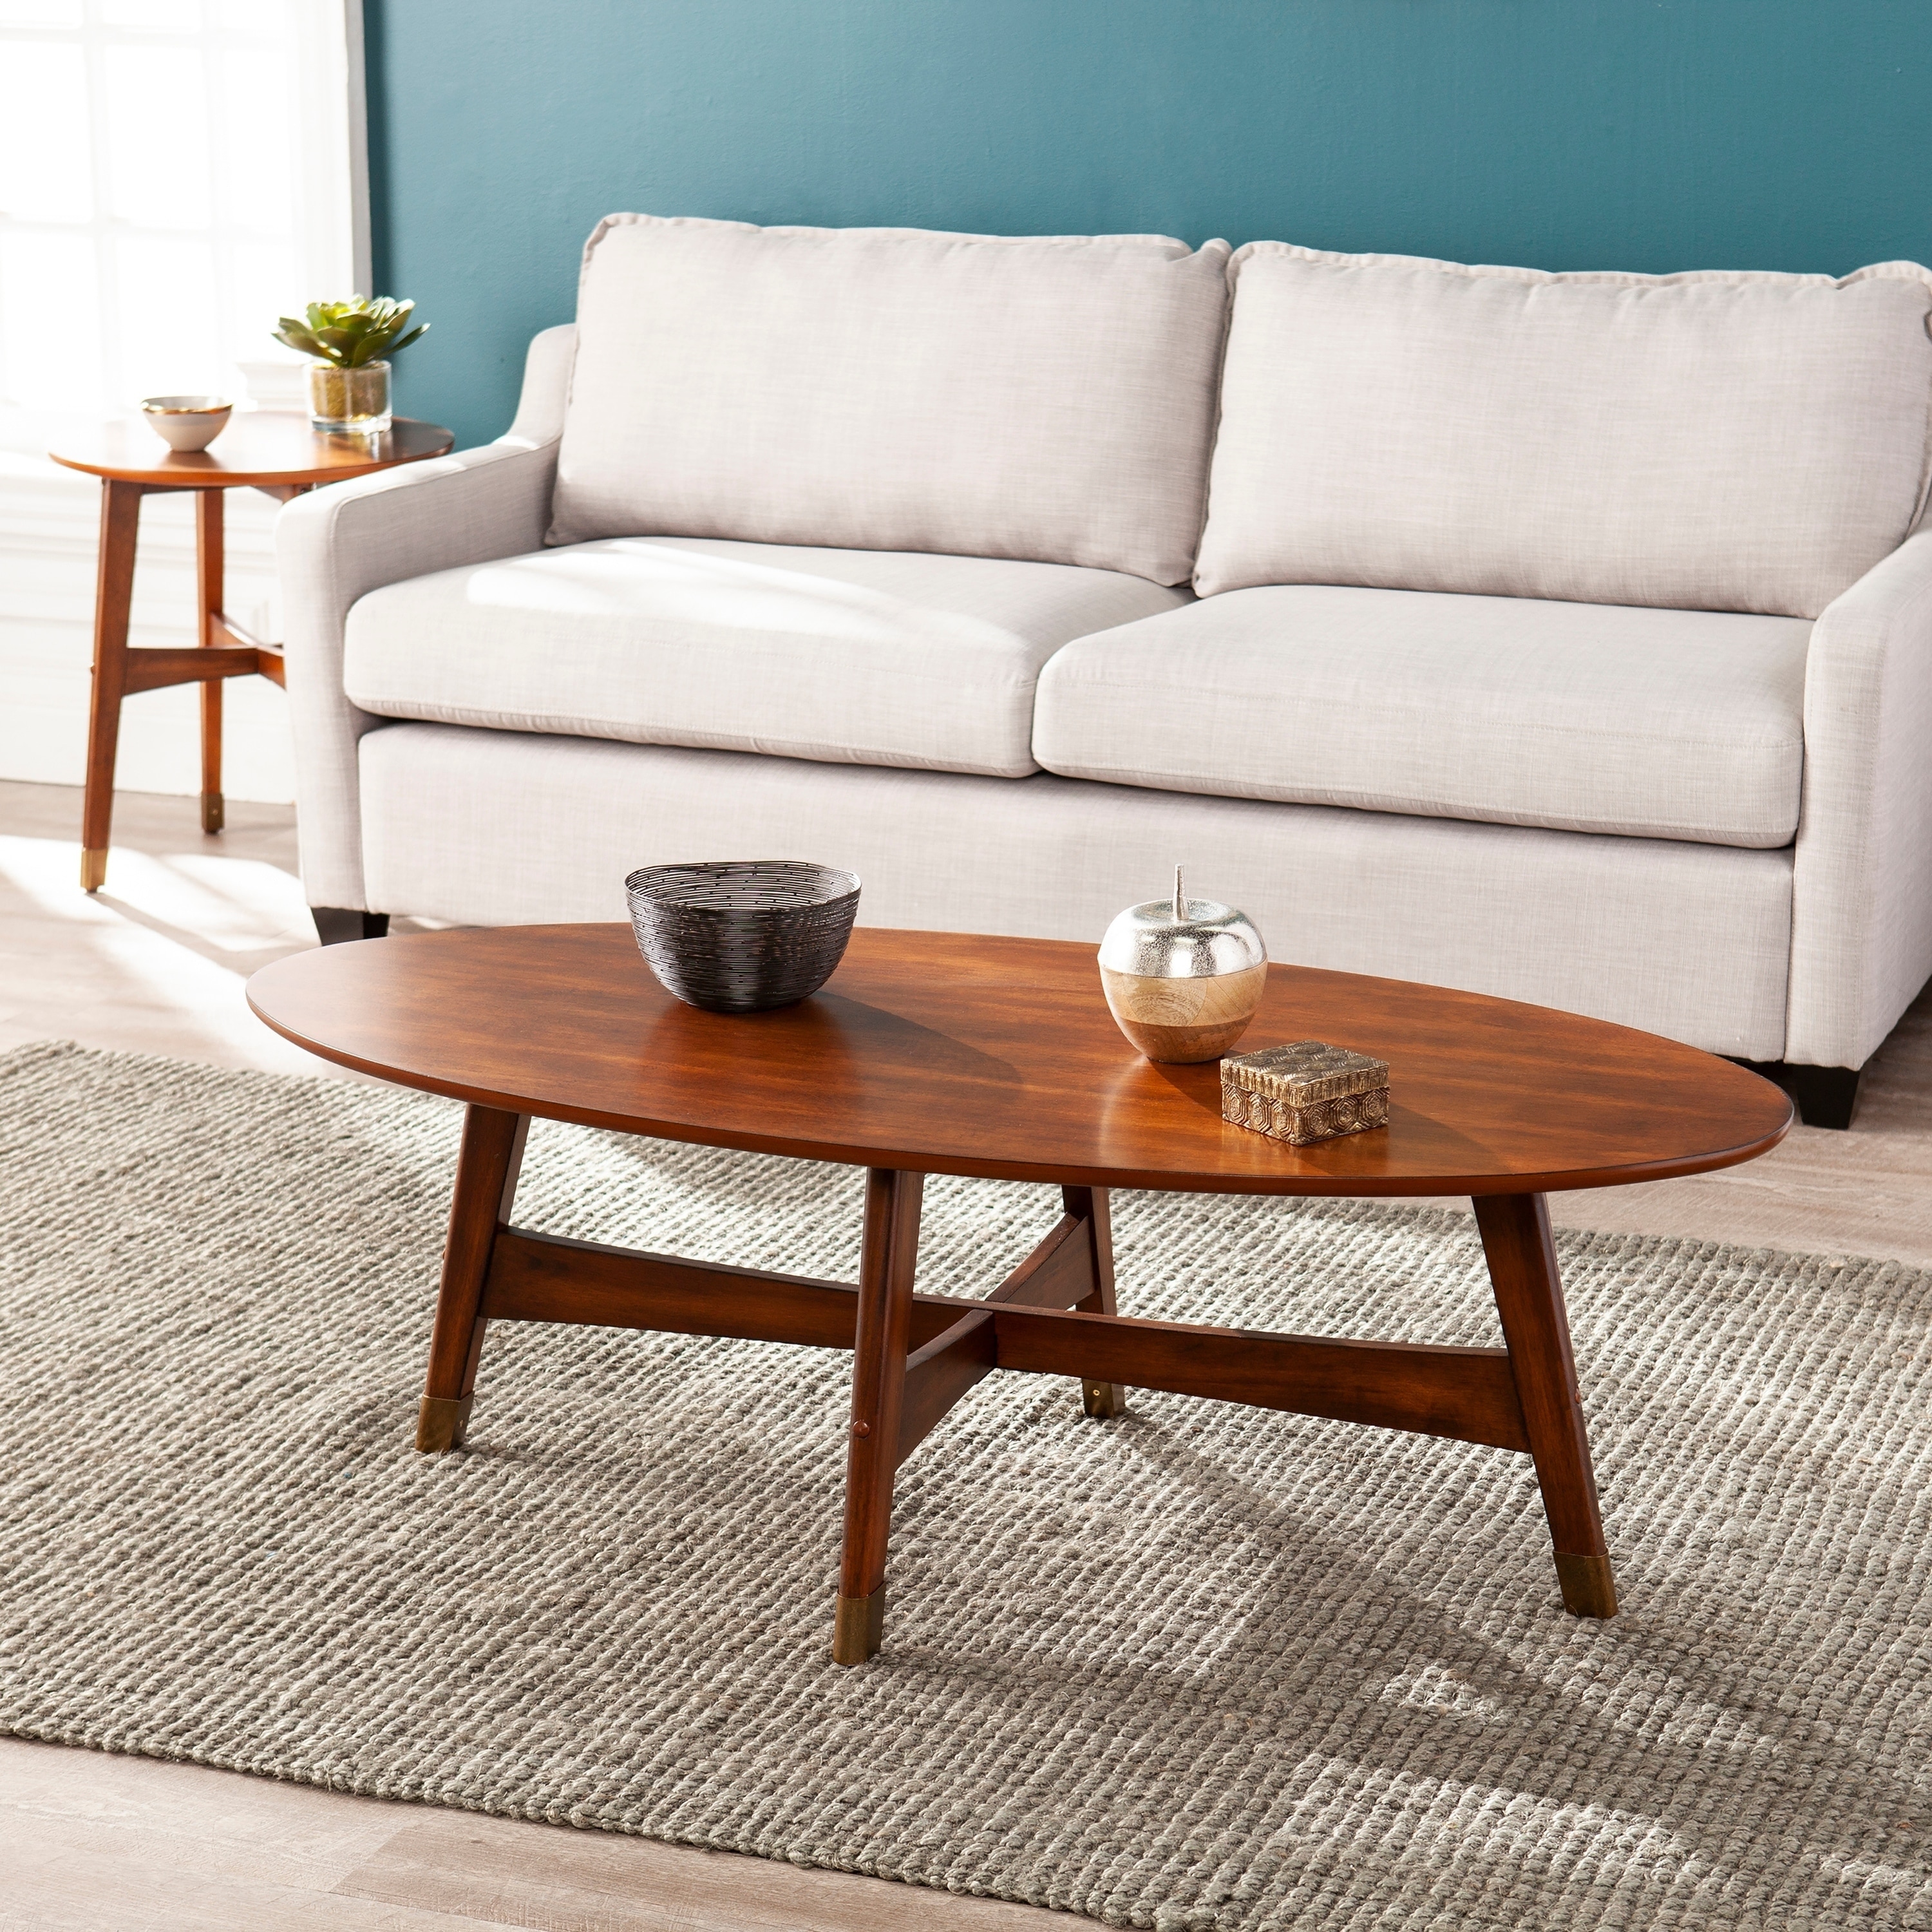 Shop Black Friday Deals On Carson Carrington Ale Oval Mid Century Modern Coffee Table Overstock 22700516 Brown